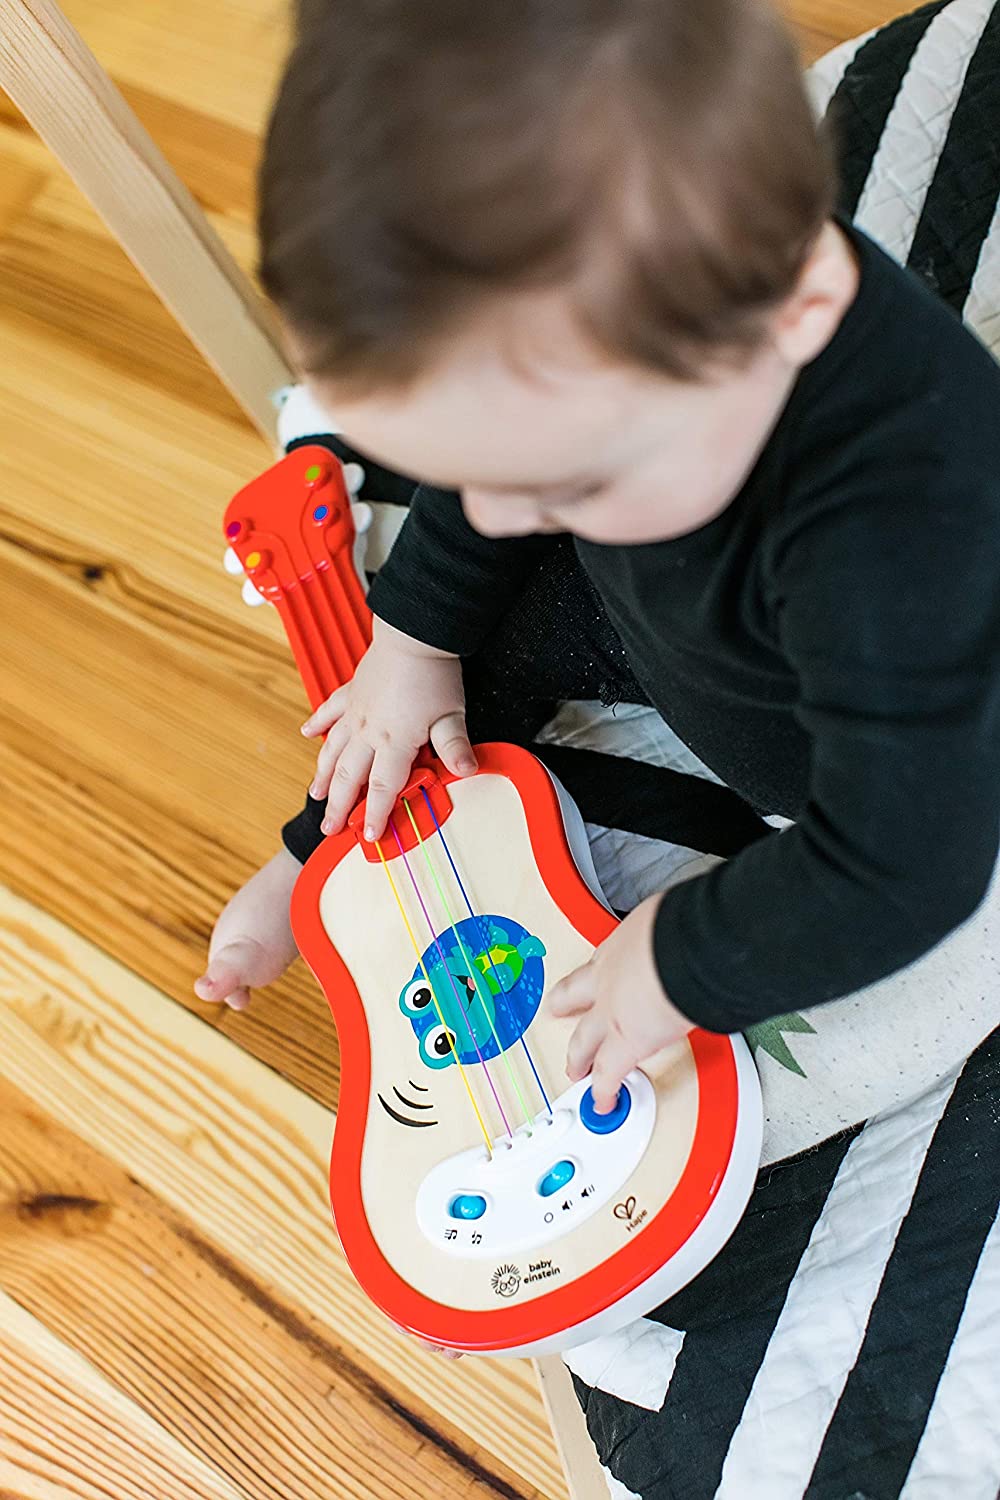 Baby Einstein Magic Touch Ukulele Wooden Musical Toy, Ages 12 months+, Red